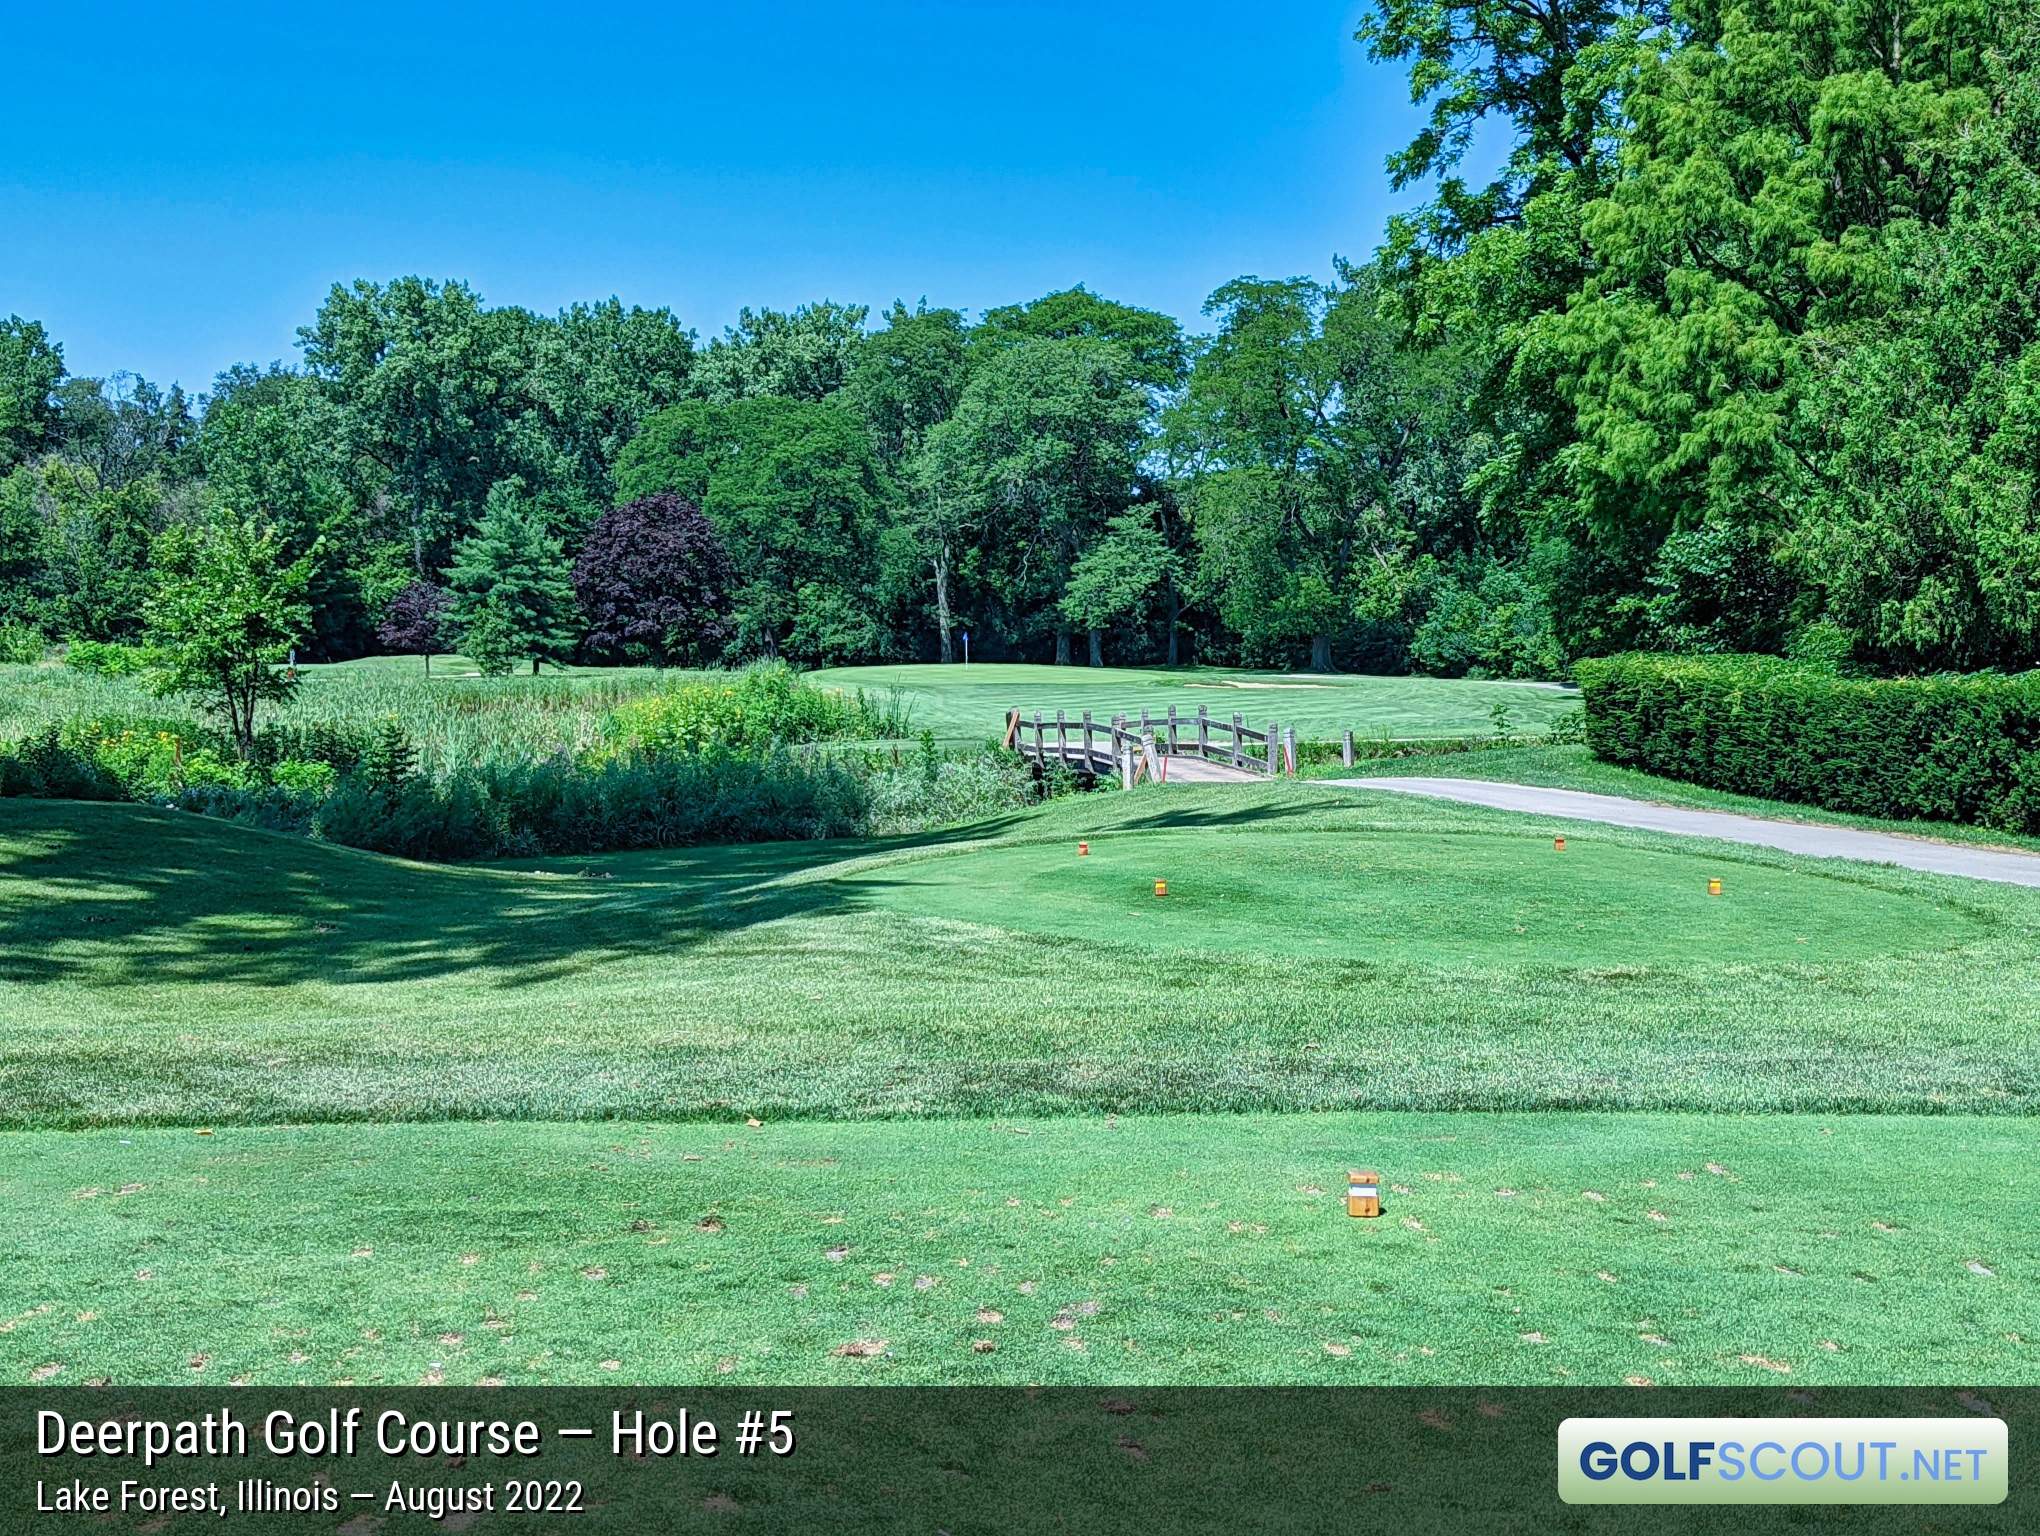 Photo of hole #5 at Deerpath Golf Course in Lake Forest, Illinois. 